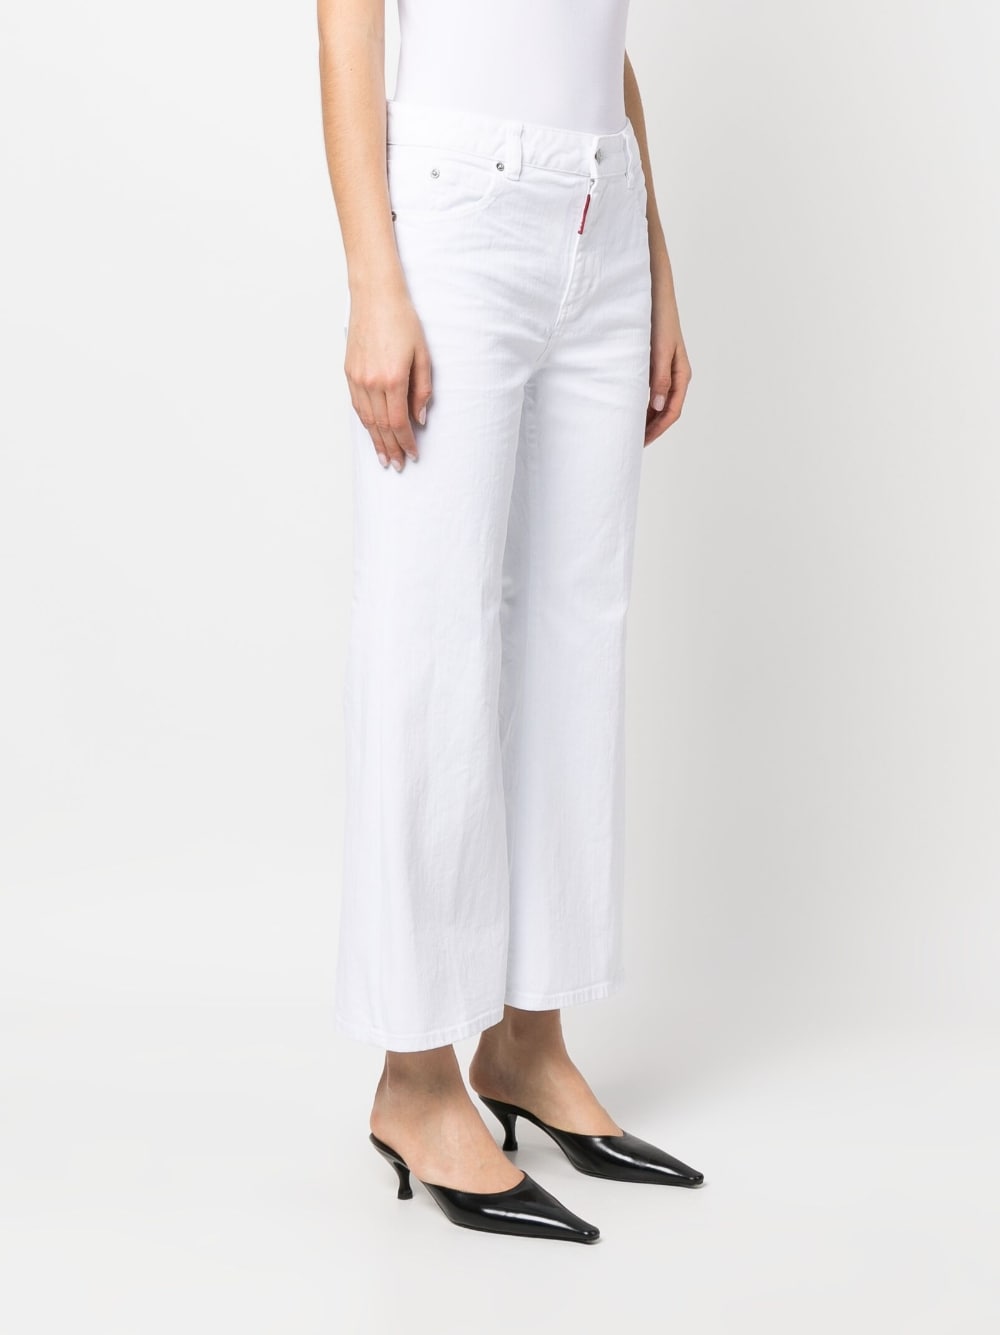 DSQUARED2 - White Bull cropped jeans